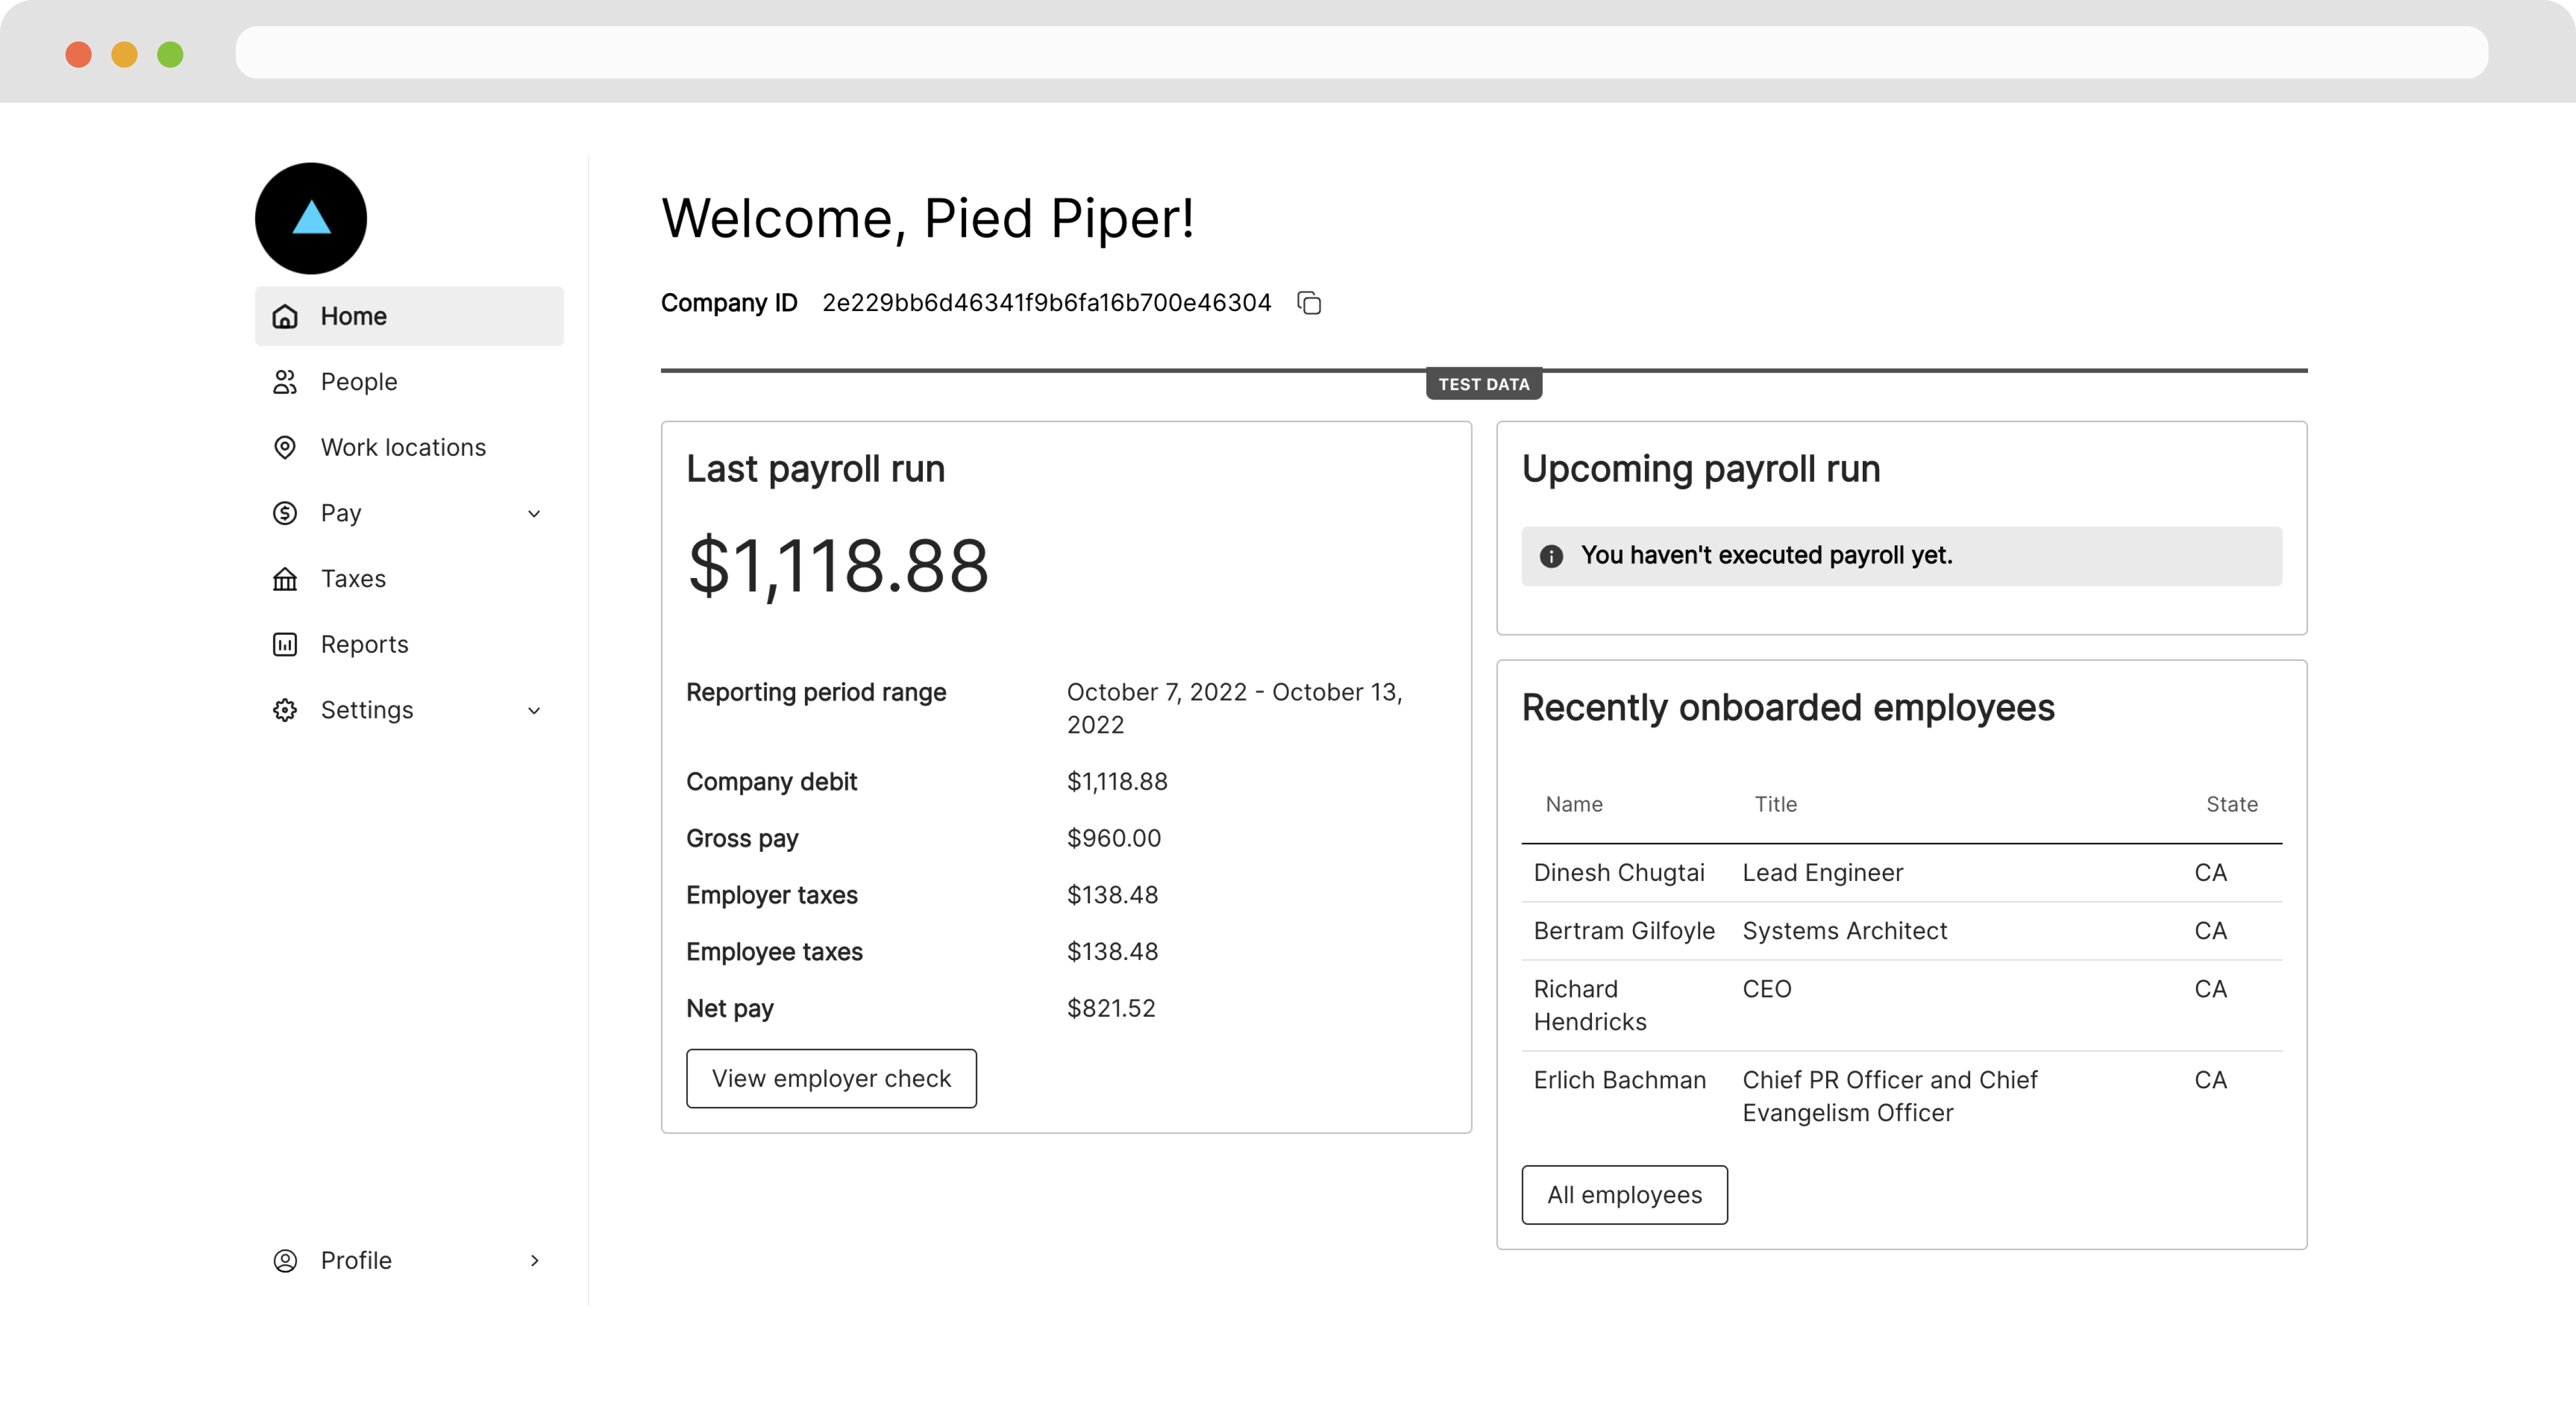 Whitelabel Employer Dashboard - Home Page